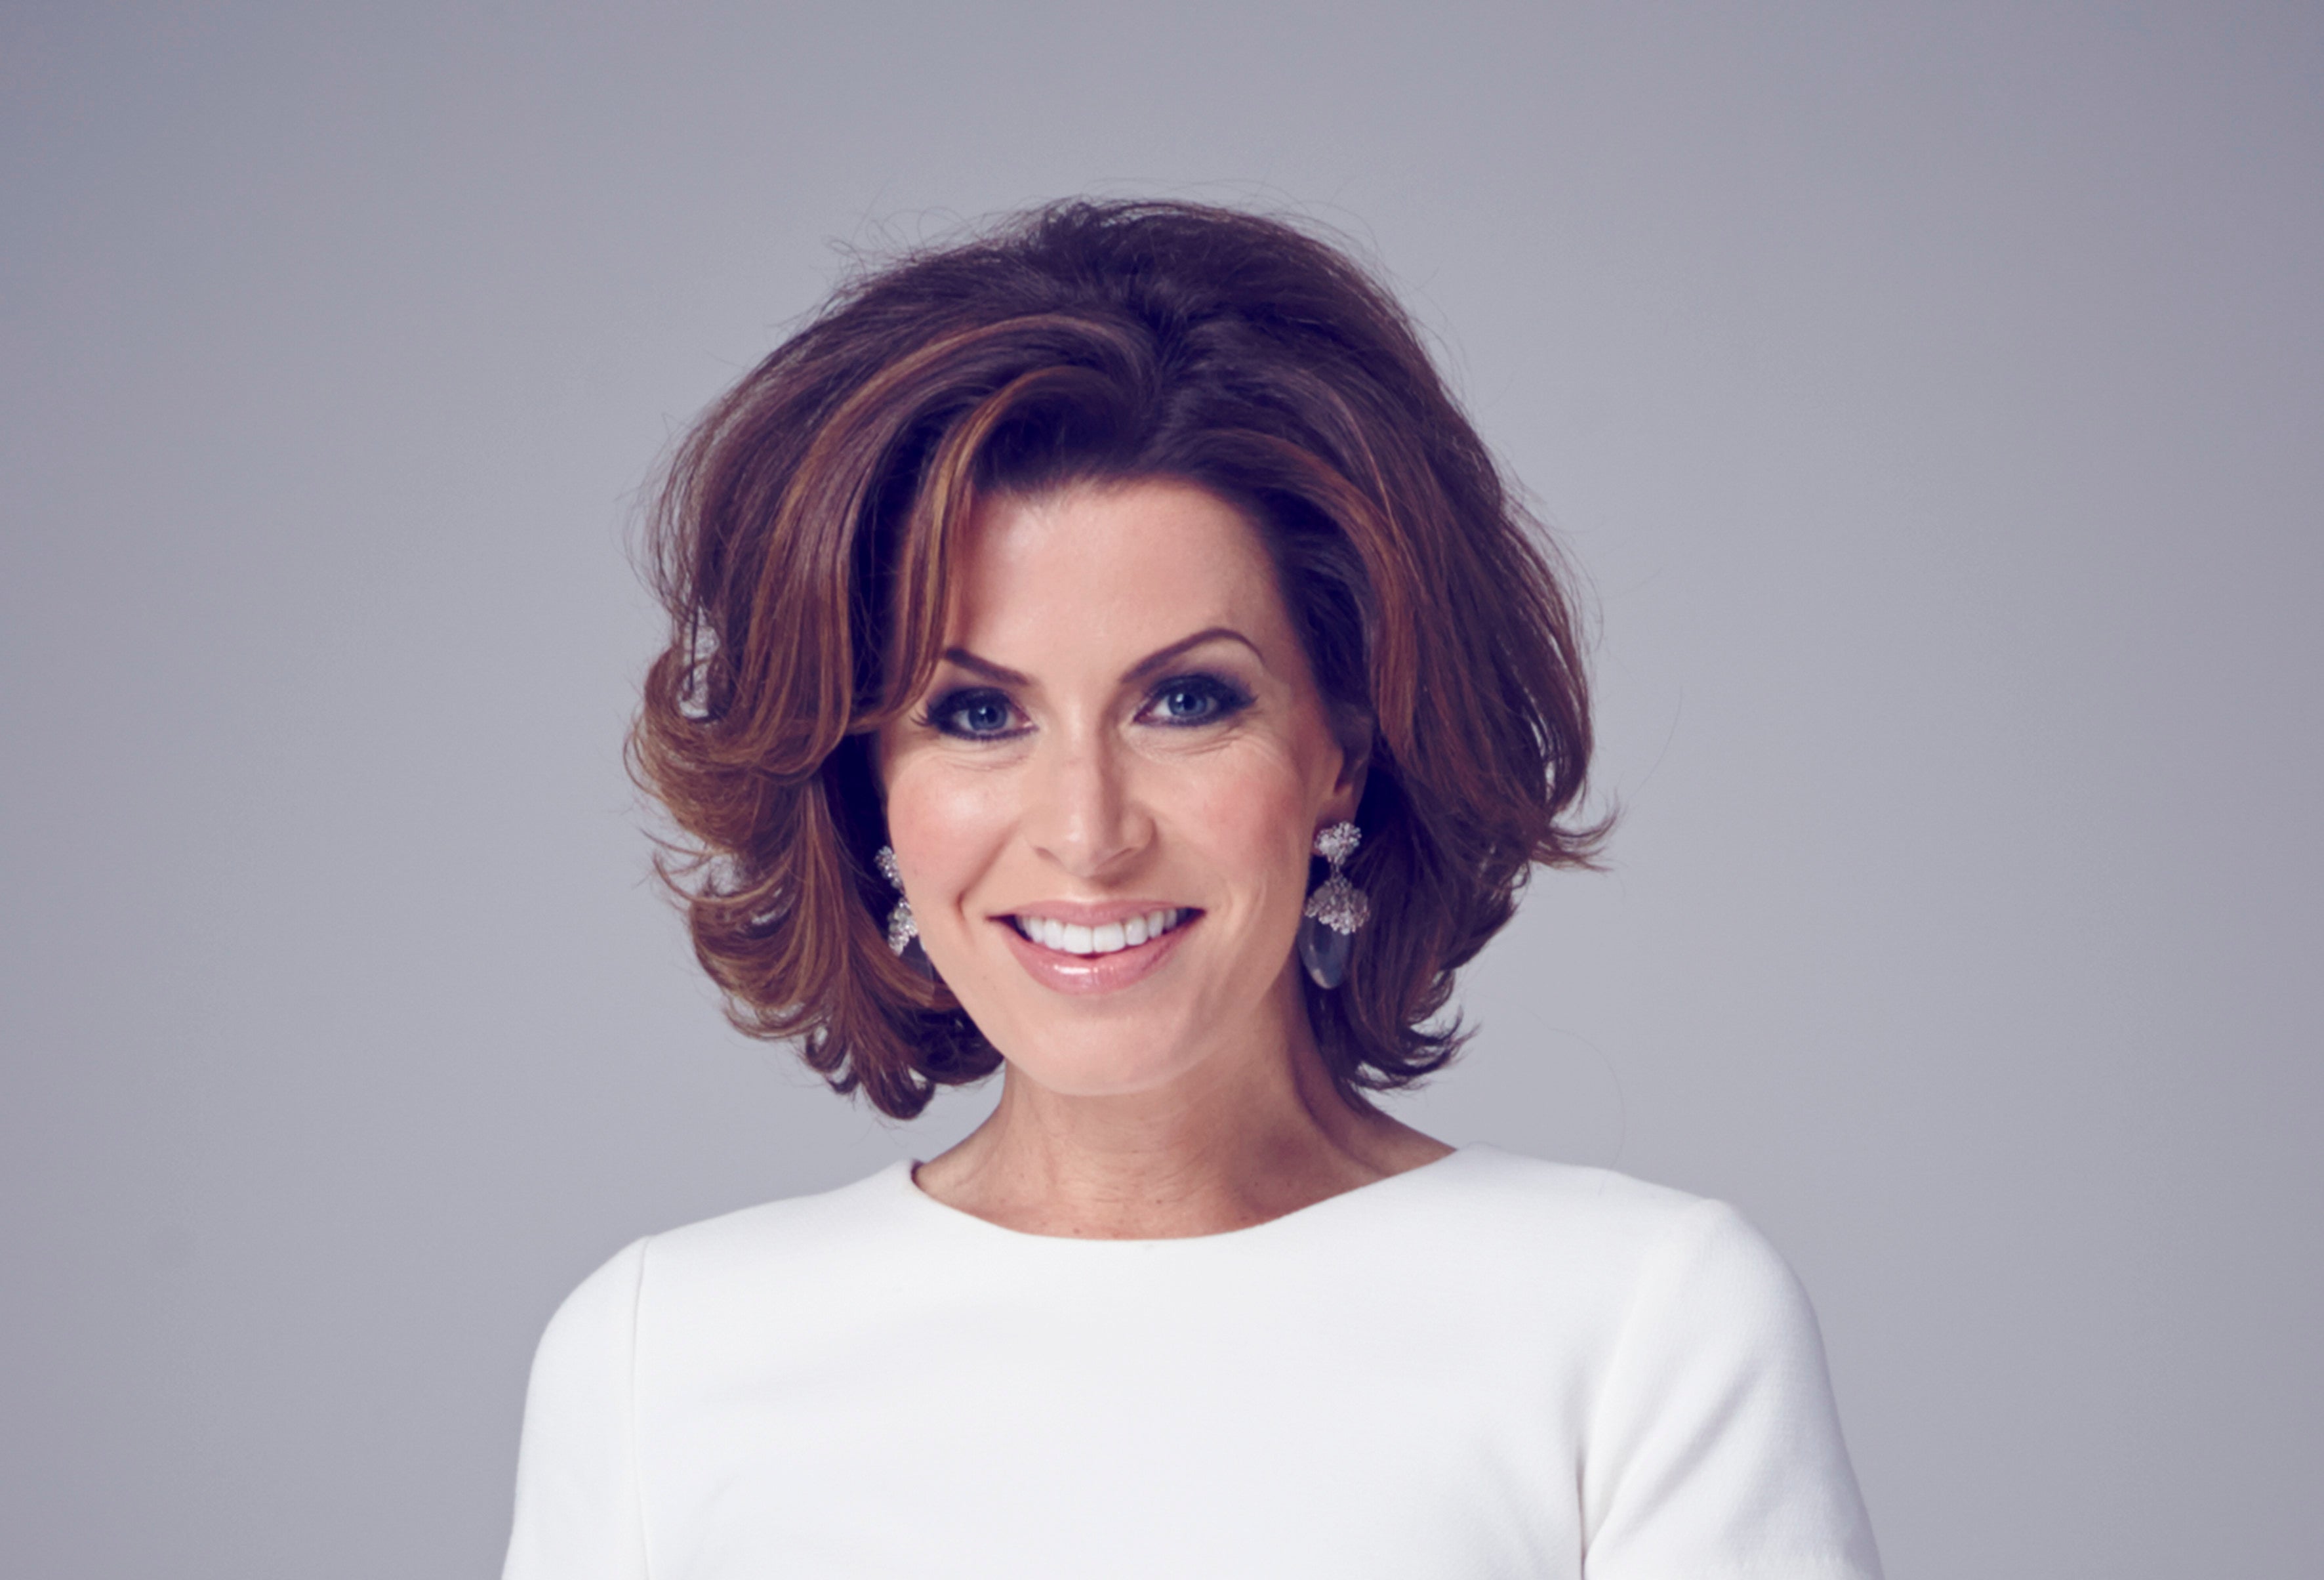 Natasha Kaplinsky My husbands brush with Covid was a shocking experience The Independent